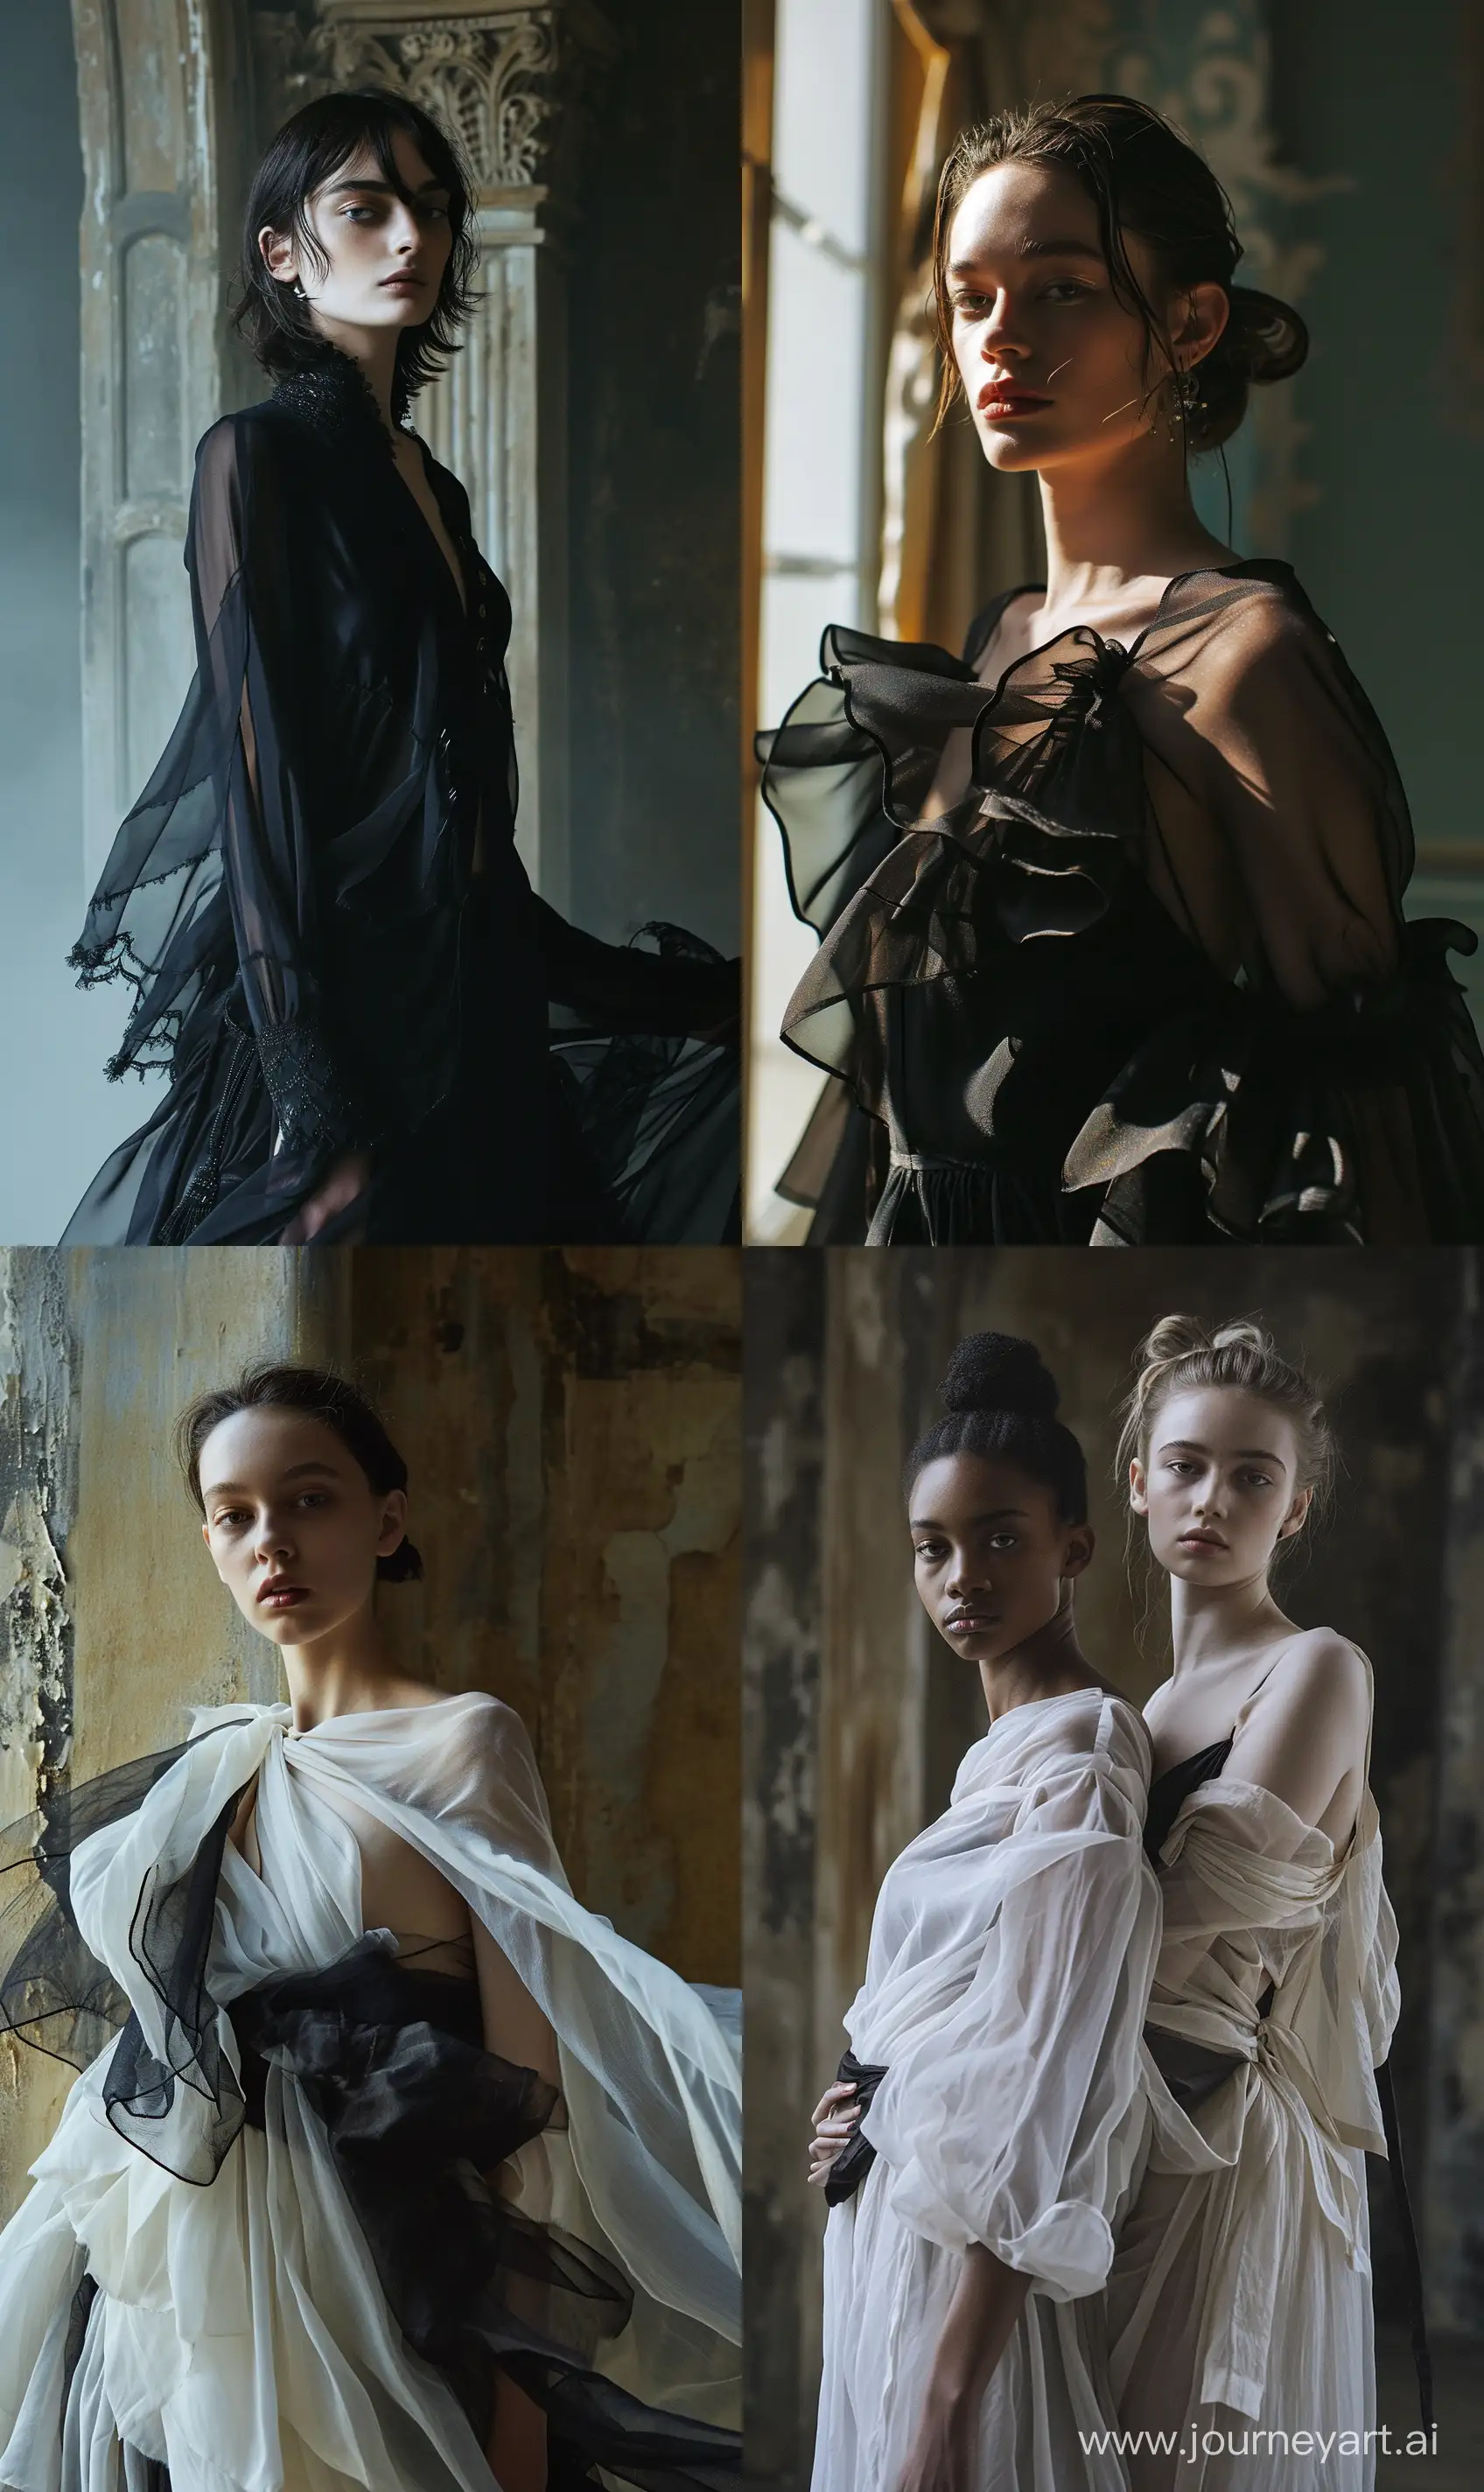 An avant garde womenswear luxury minimal collection inspired by the works of Schiaperelli. Minimalist elements, asymmetrical cuts, exaggerated silhouettes, tailoring, and intricate details. Silk. Sheer. Layers. The collection is a fusion of high fashion and streetwear, with a touch of punk and grunge and couture. editorial by Harper's Bazaar Styled by Edward Enninful for Vogue Italia and Dazed, the editorial features high-key lighting, ultra-detail shots, and cinematic angles. Shot on a 50mm lens with a shallow depth of field, the photographs showcase the full detail of the clothing. Color grading and post-processing create a vivid, high-contrast aesthetic. The luxury brand campaign is in the style of Tim Walker, with models posed in surreal, dreamlike environments that blend fantasy and reality, with a cinematic sound design and a resolution of 8k. --ar 3:5 --v 6